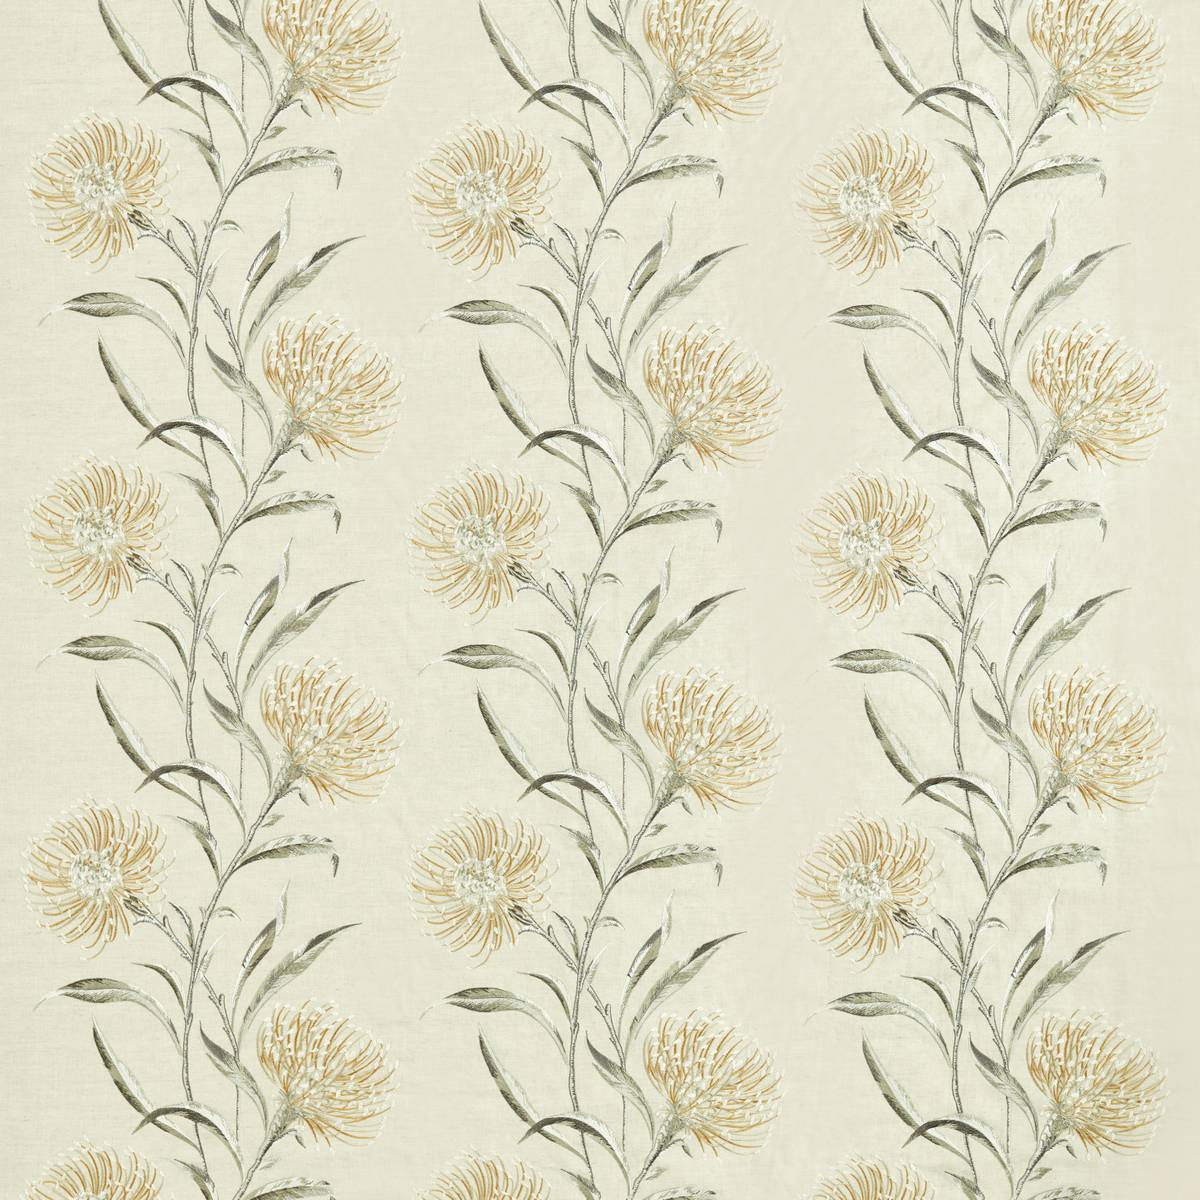 Catherinae Embroidery Hay Fabric by Sanderson